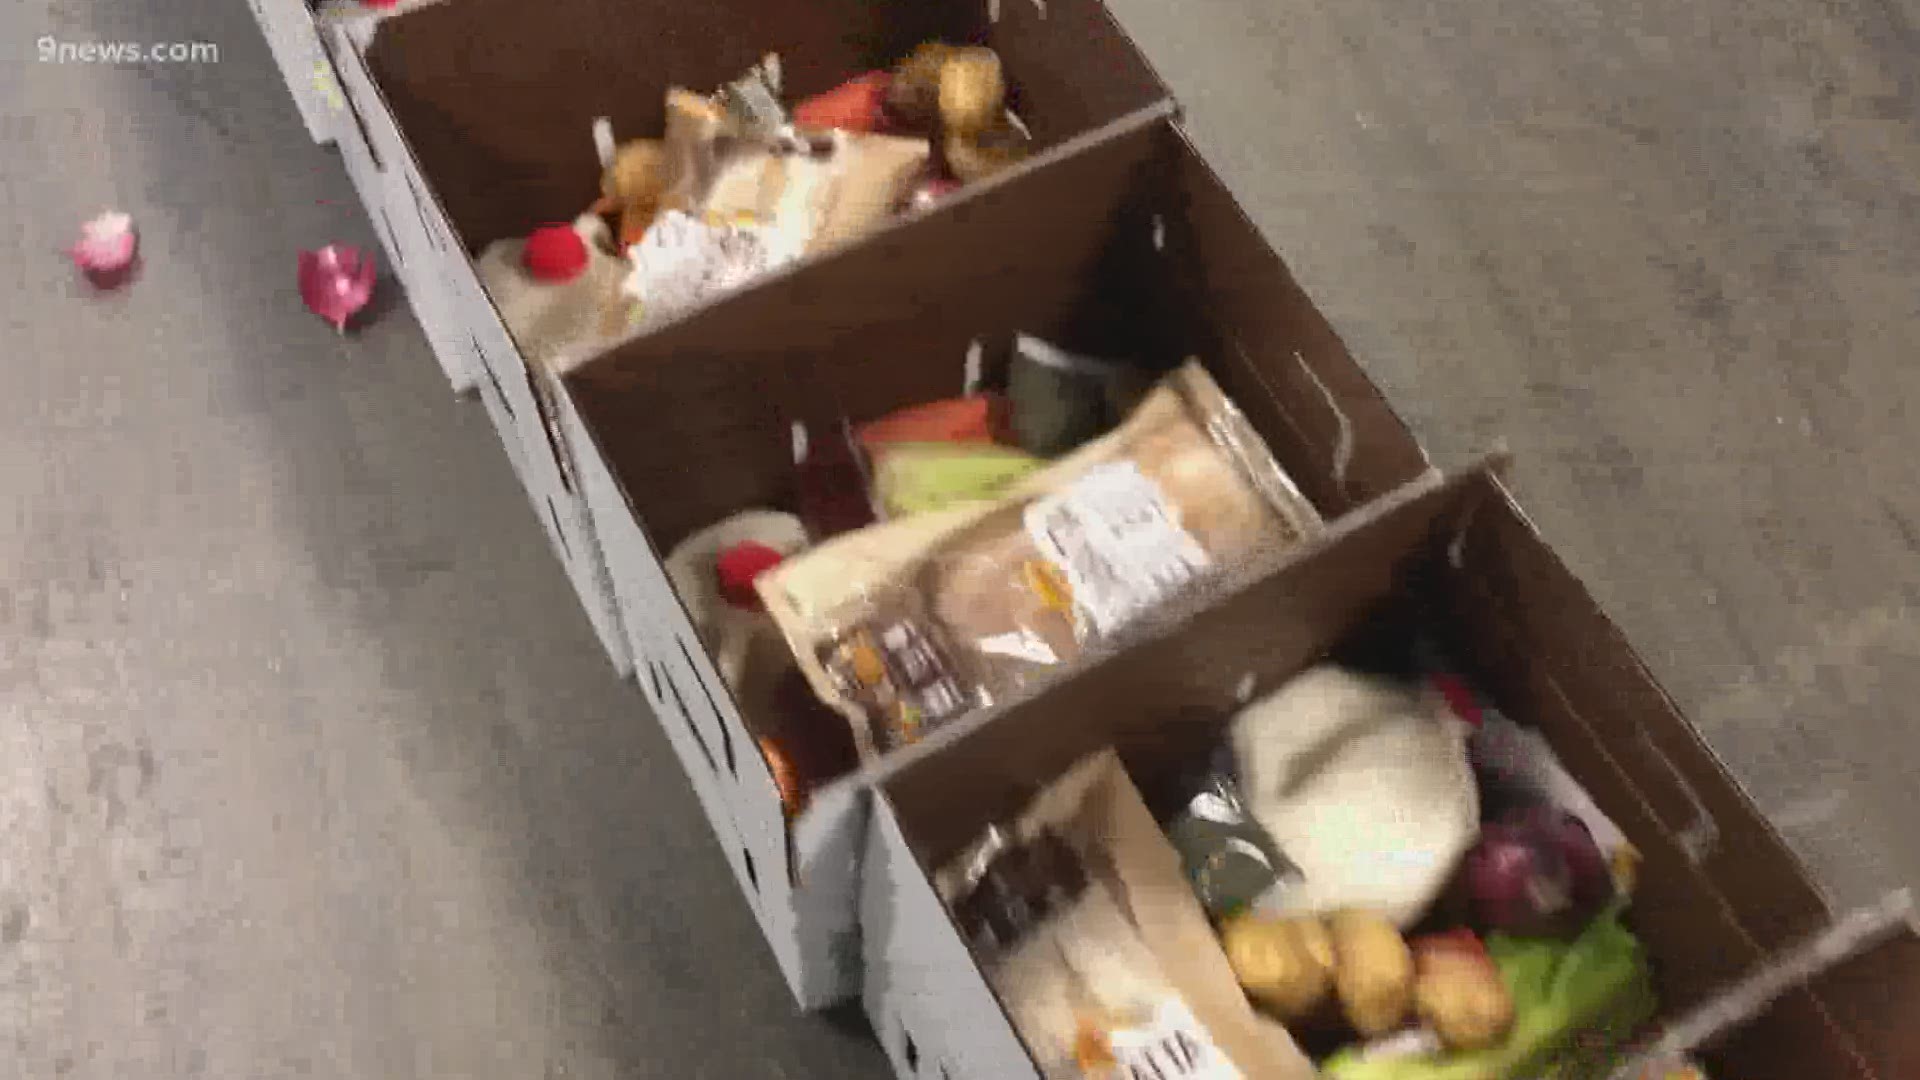 “What Chefs Want” will distribute donated food to restaurant workers on April 24.